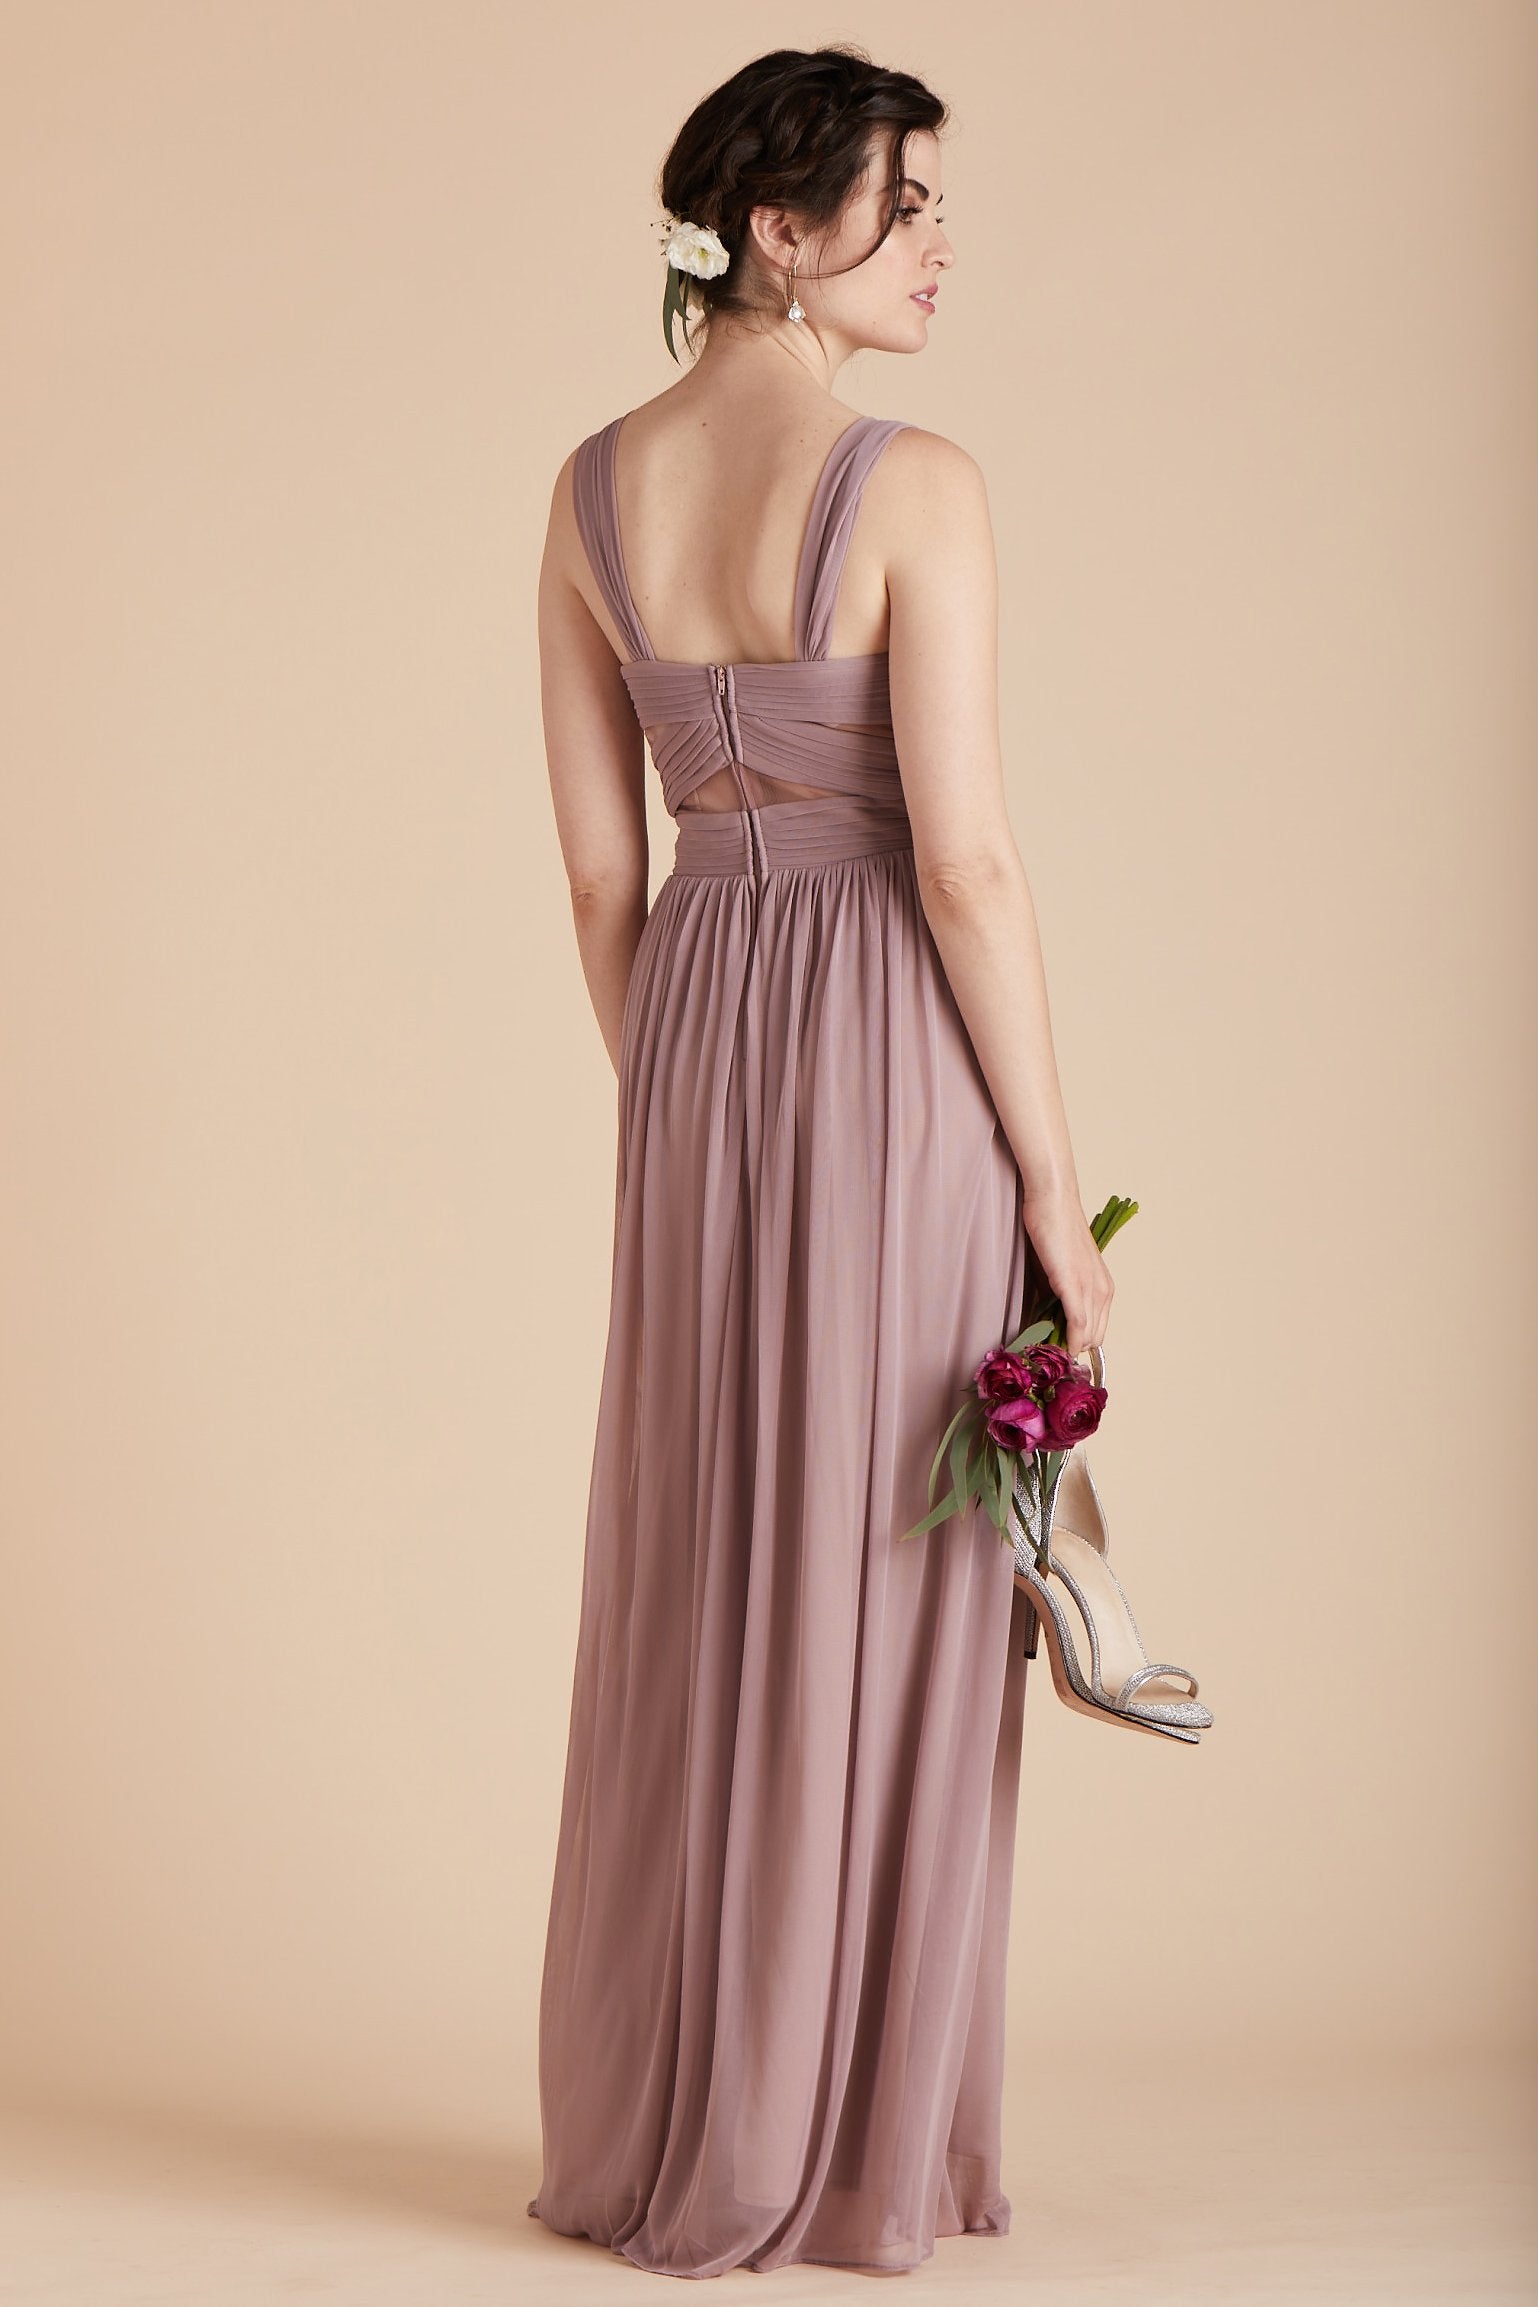 Elsye bridesmaid dress in mauve pink chiffon by Birdy Grey, back view